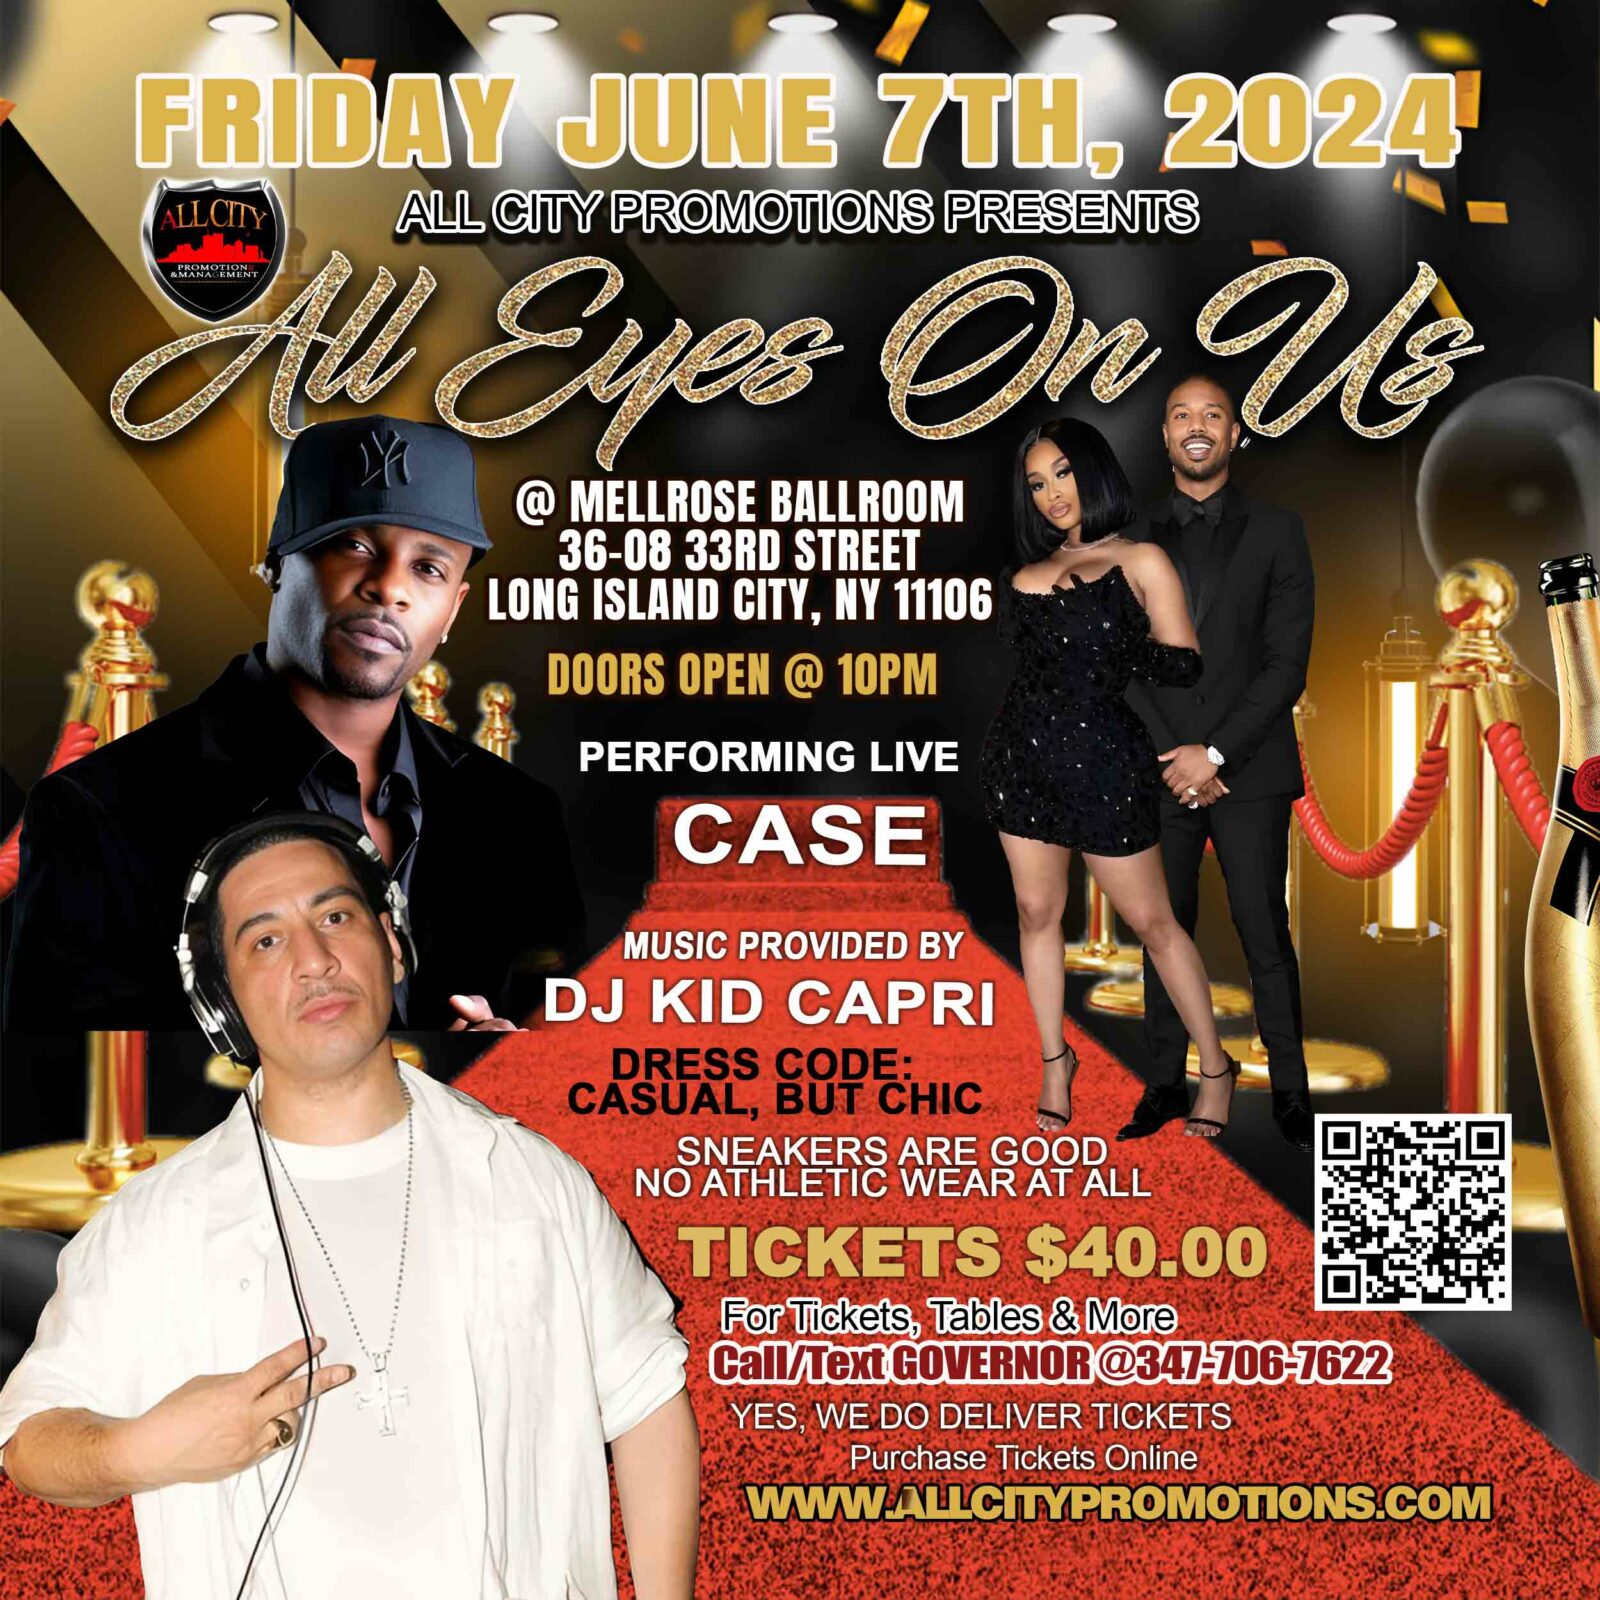 All Eyes On Us flyer June 7th, 2024